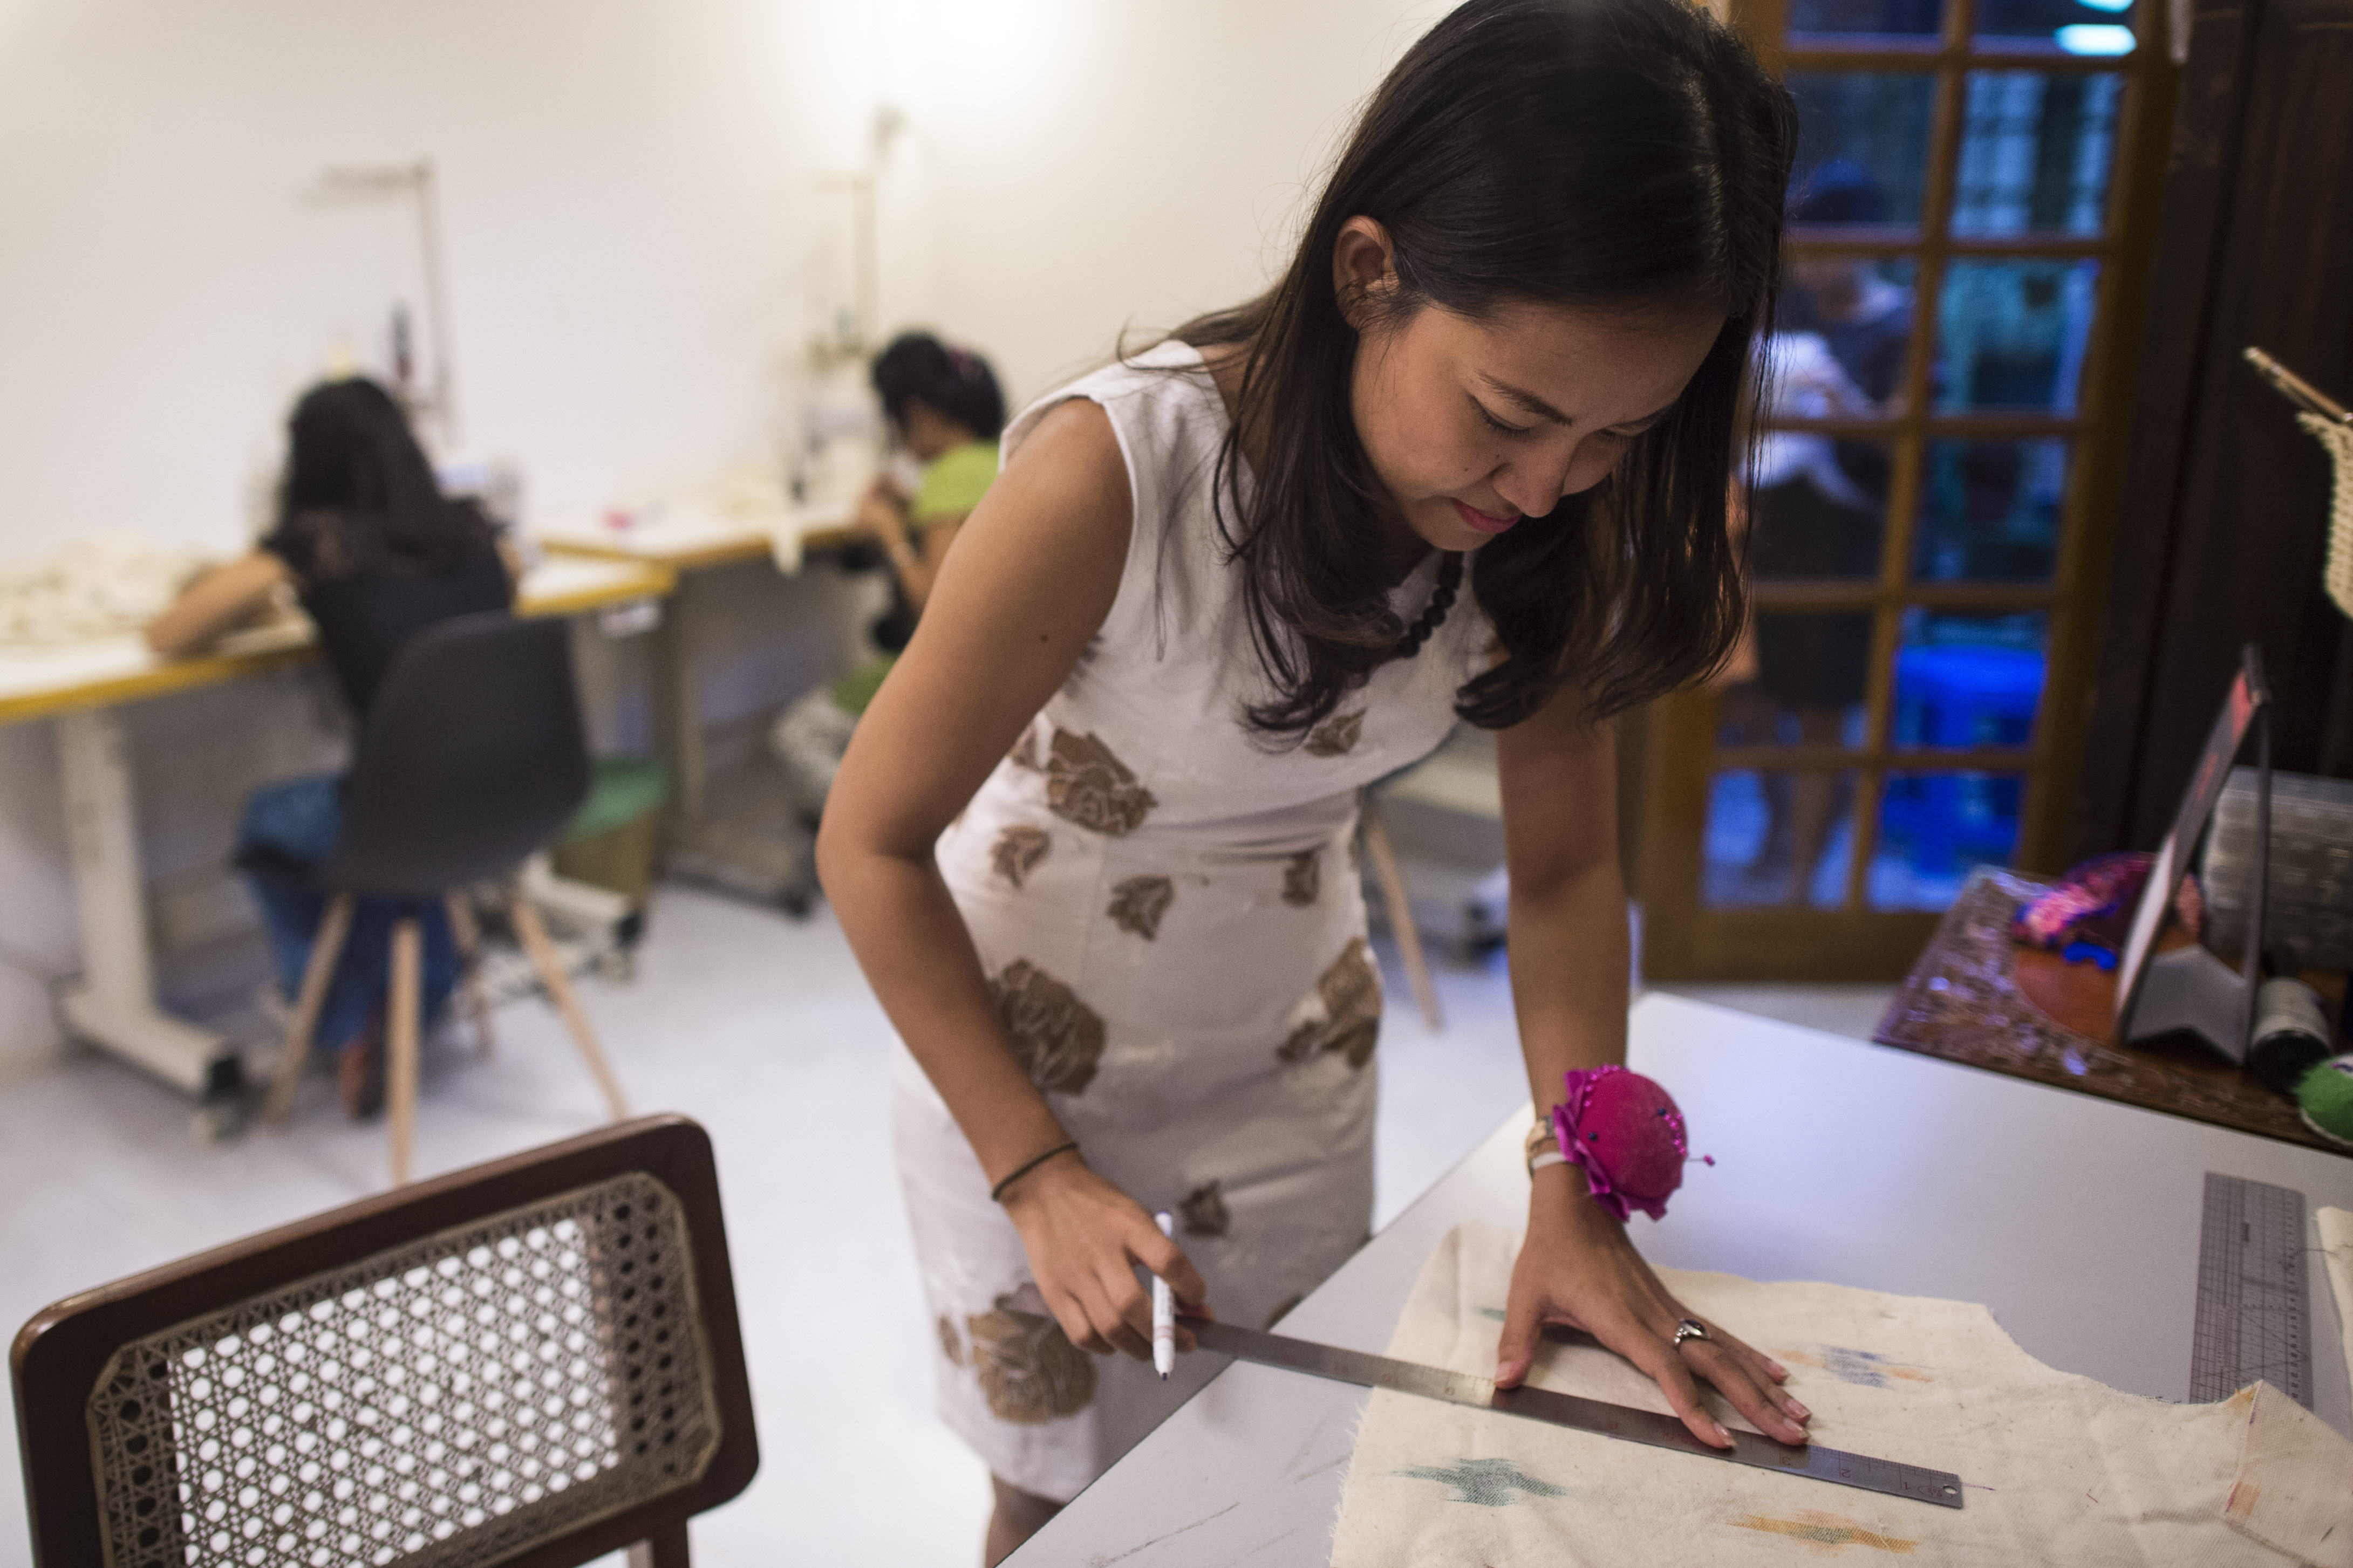 Made in Myanmar: designers put ethical twist on local fashion